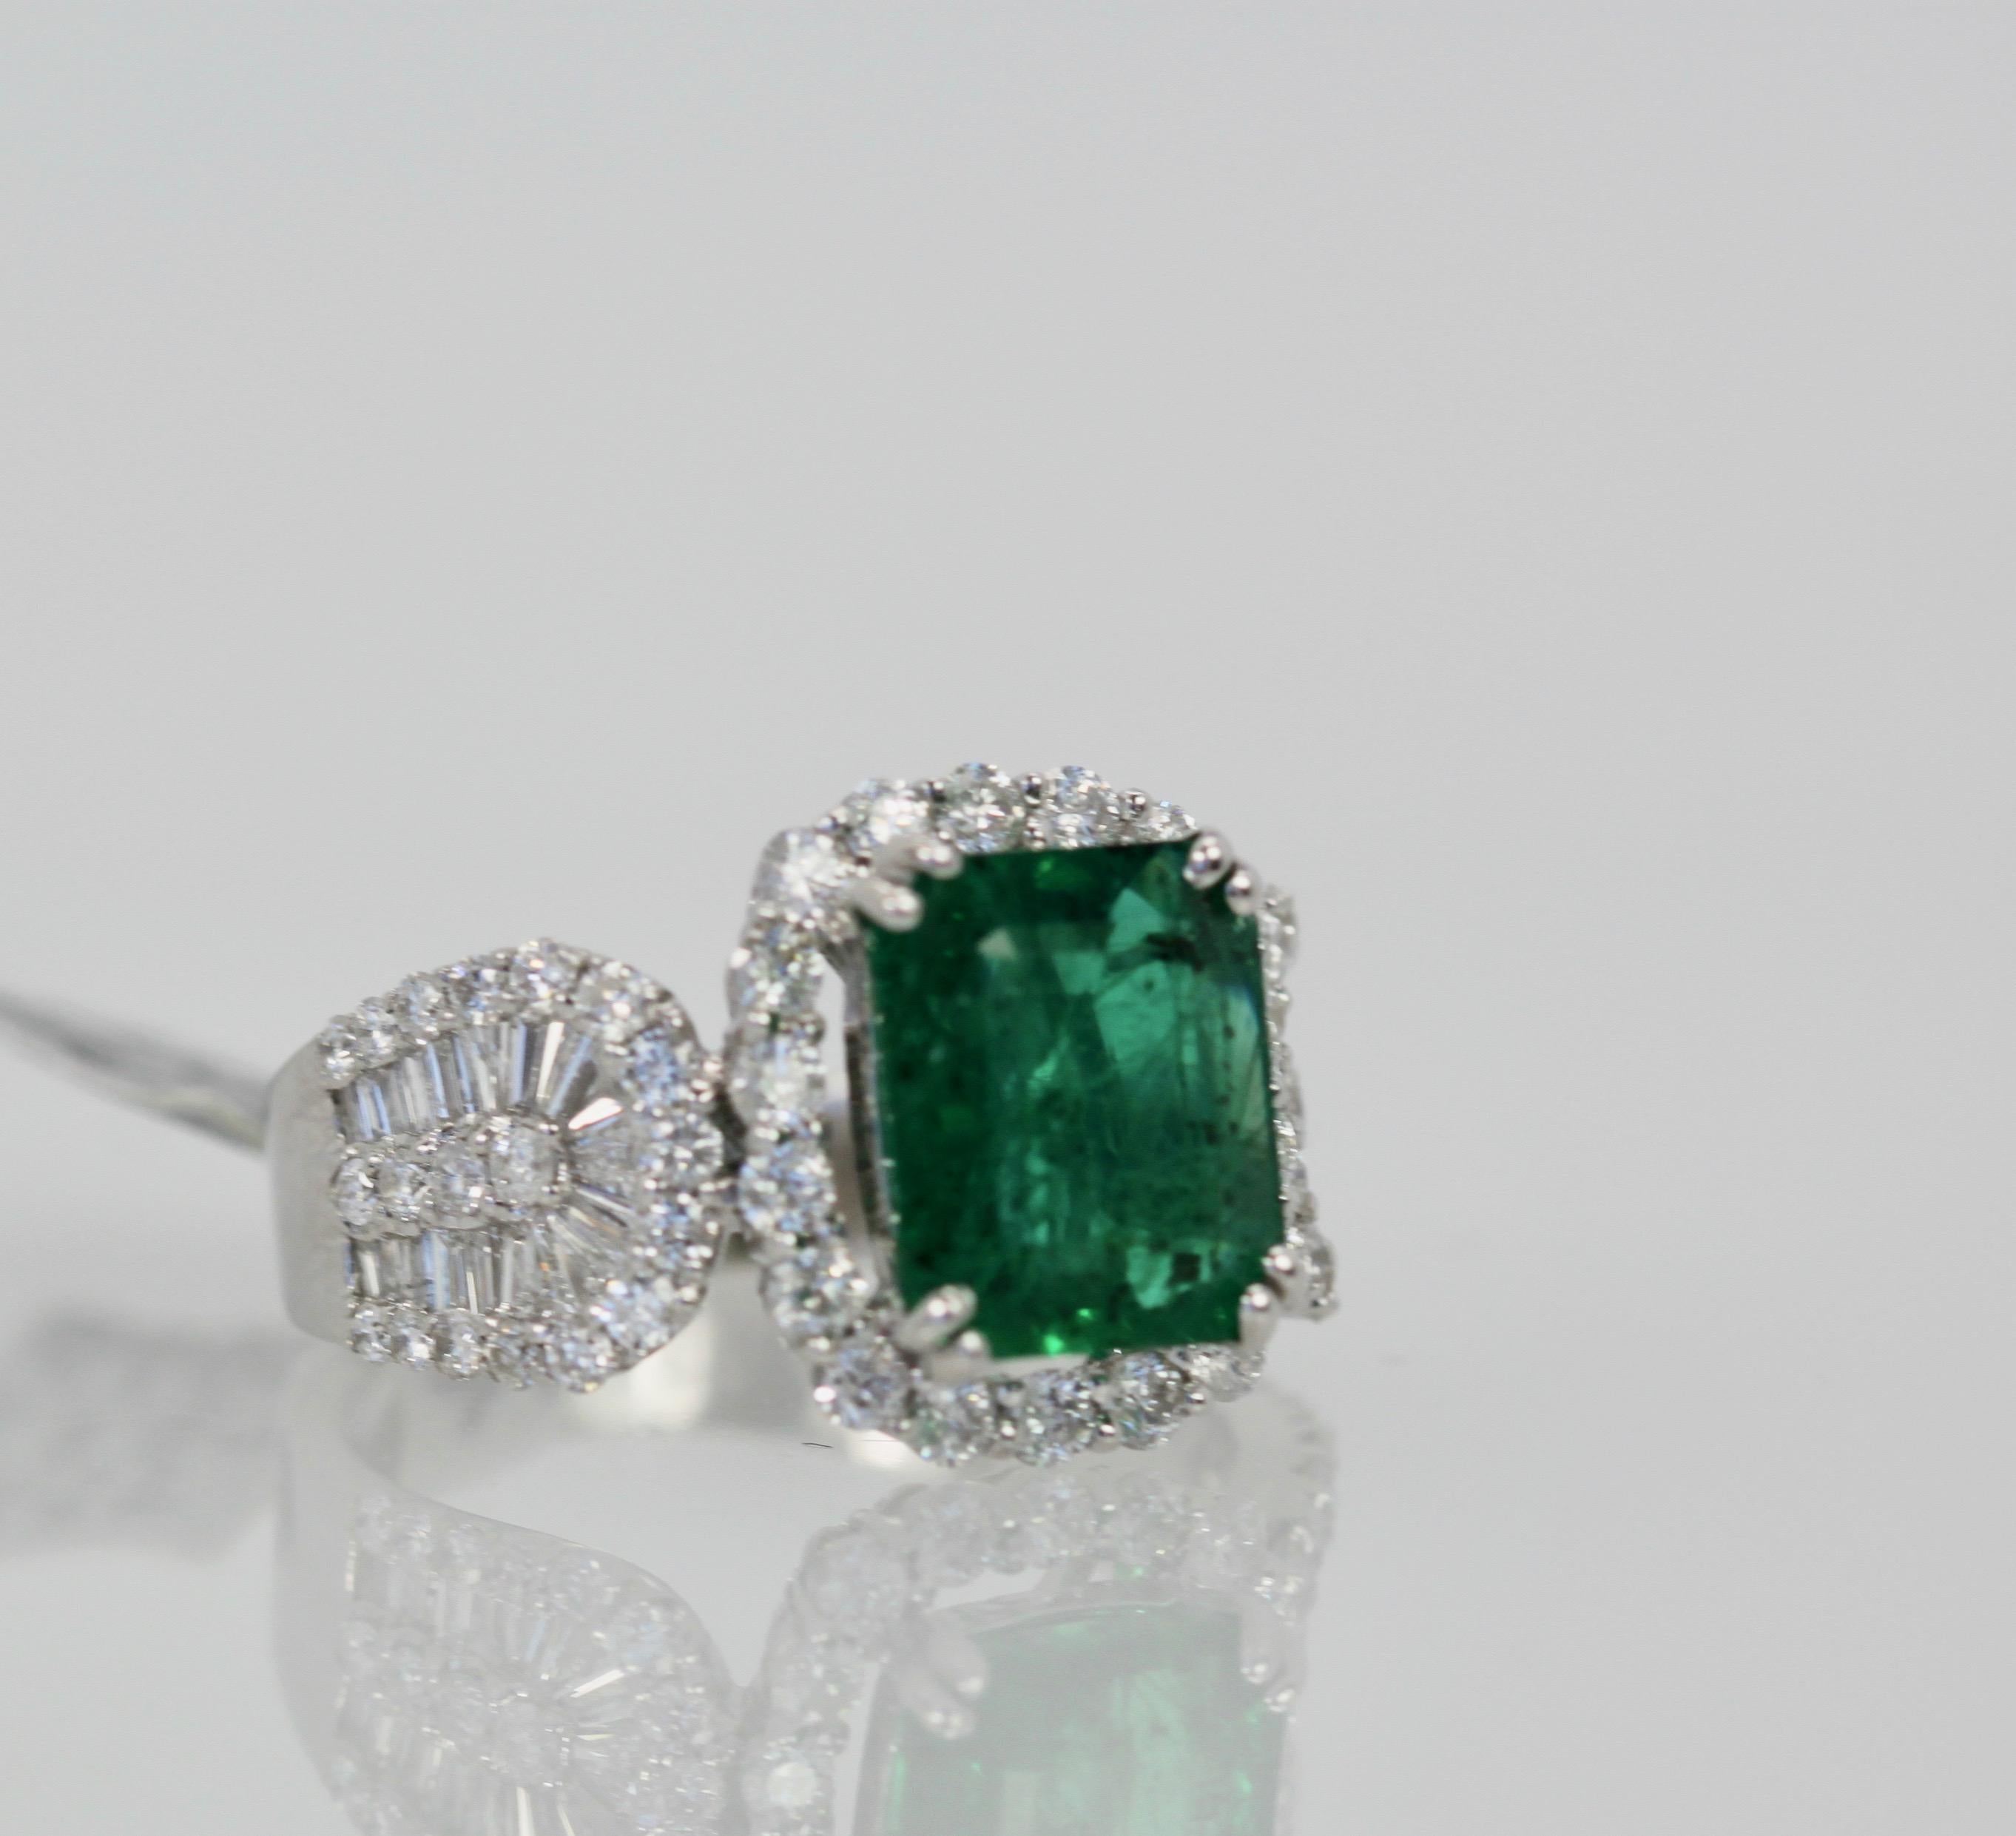 This Emerald Diamond Ring is new and never been worn.  It is a gorgeous true emerald green and without magnification is absolutely clean to the eye.  As most Emeralds have inclusions and dark spots so does this ring but without magnification it is